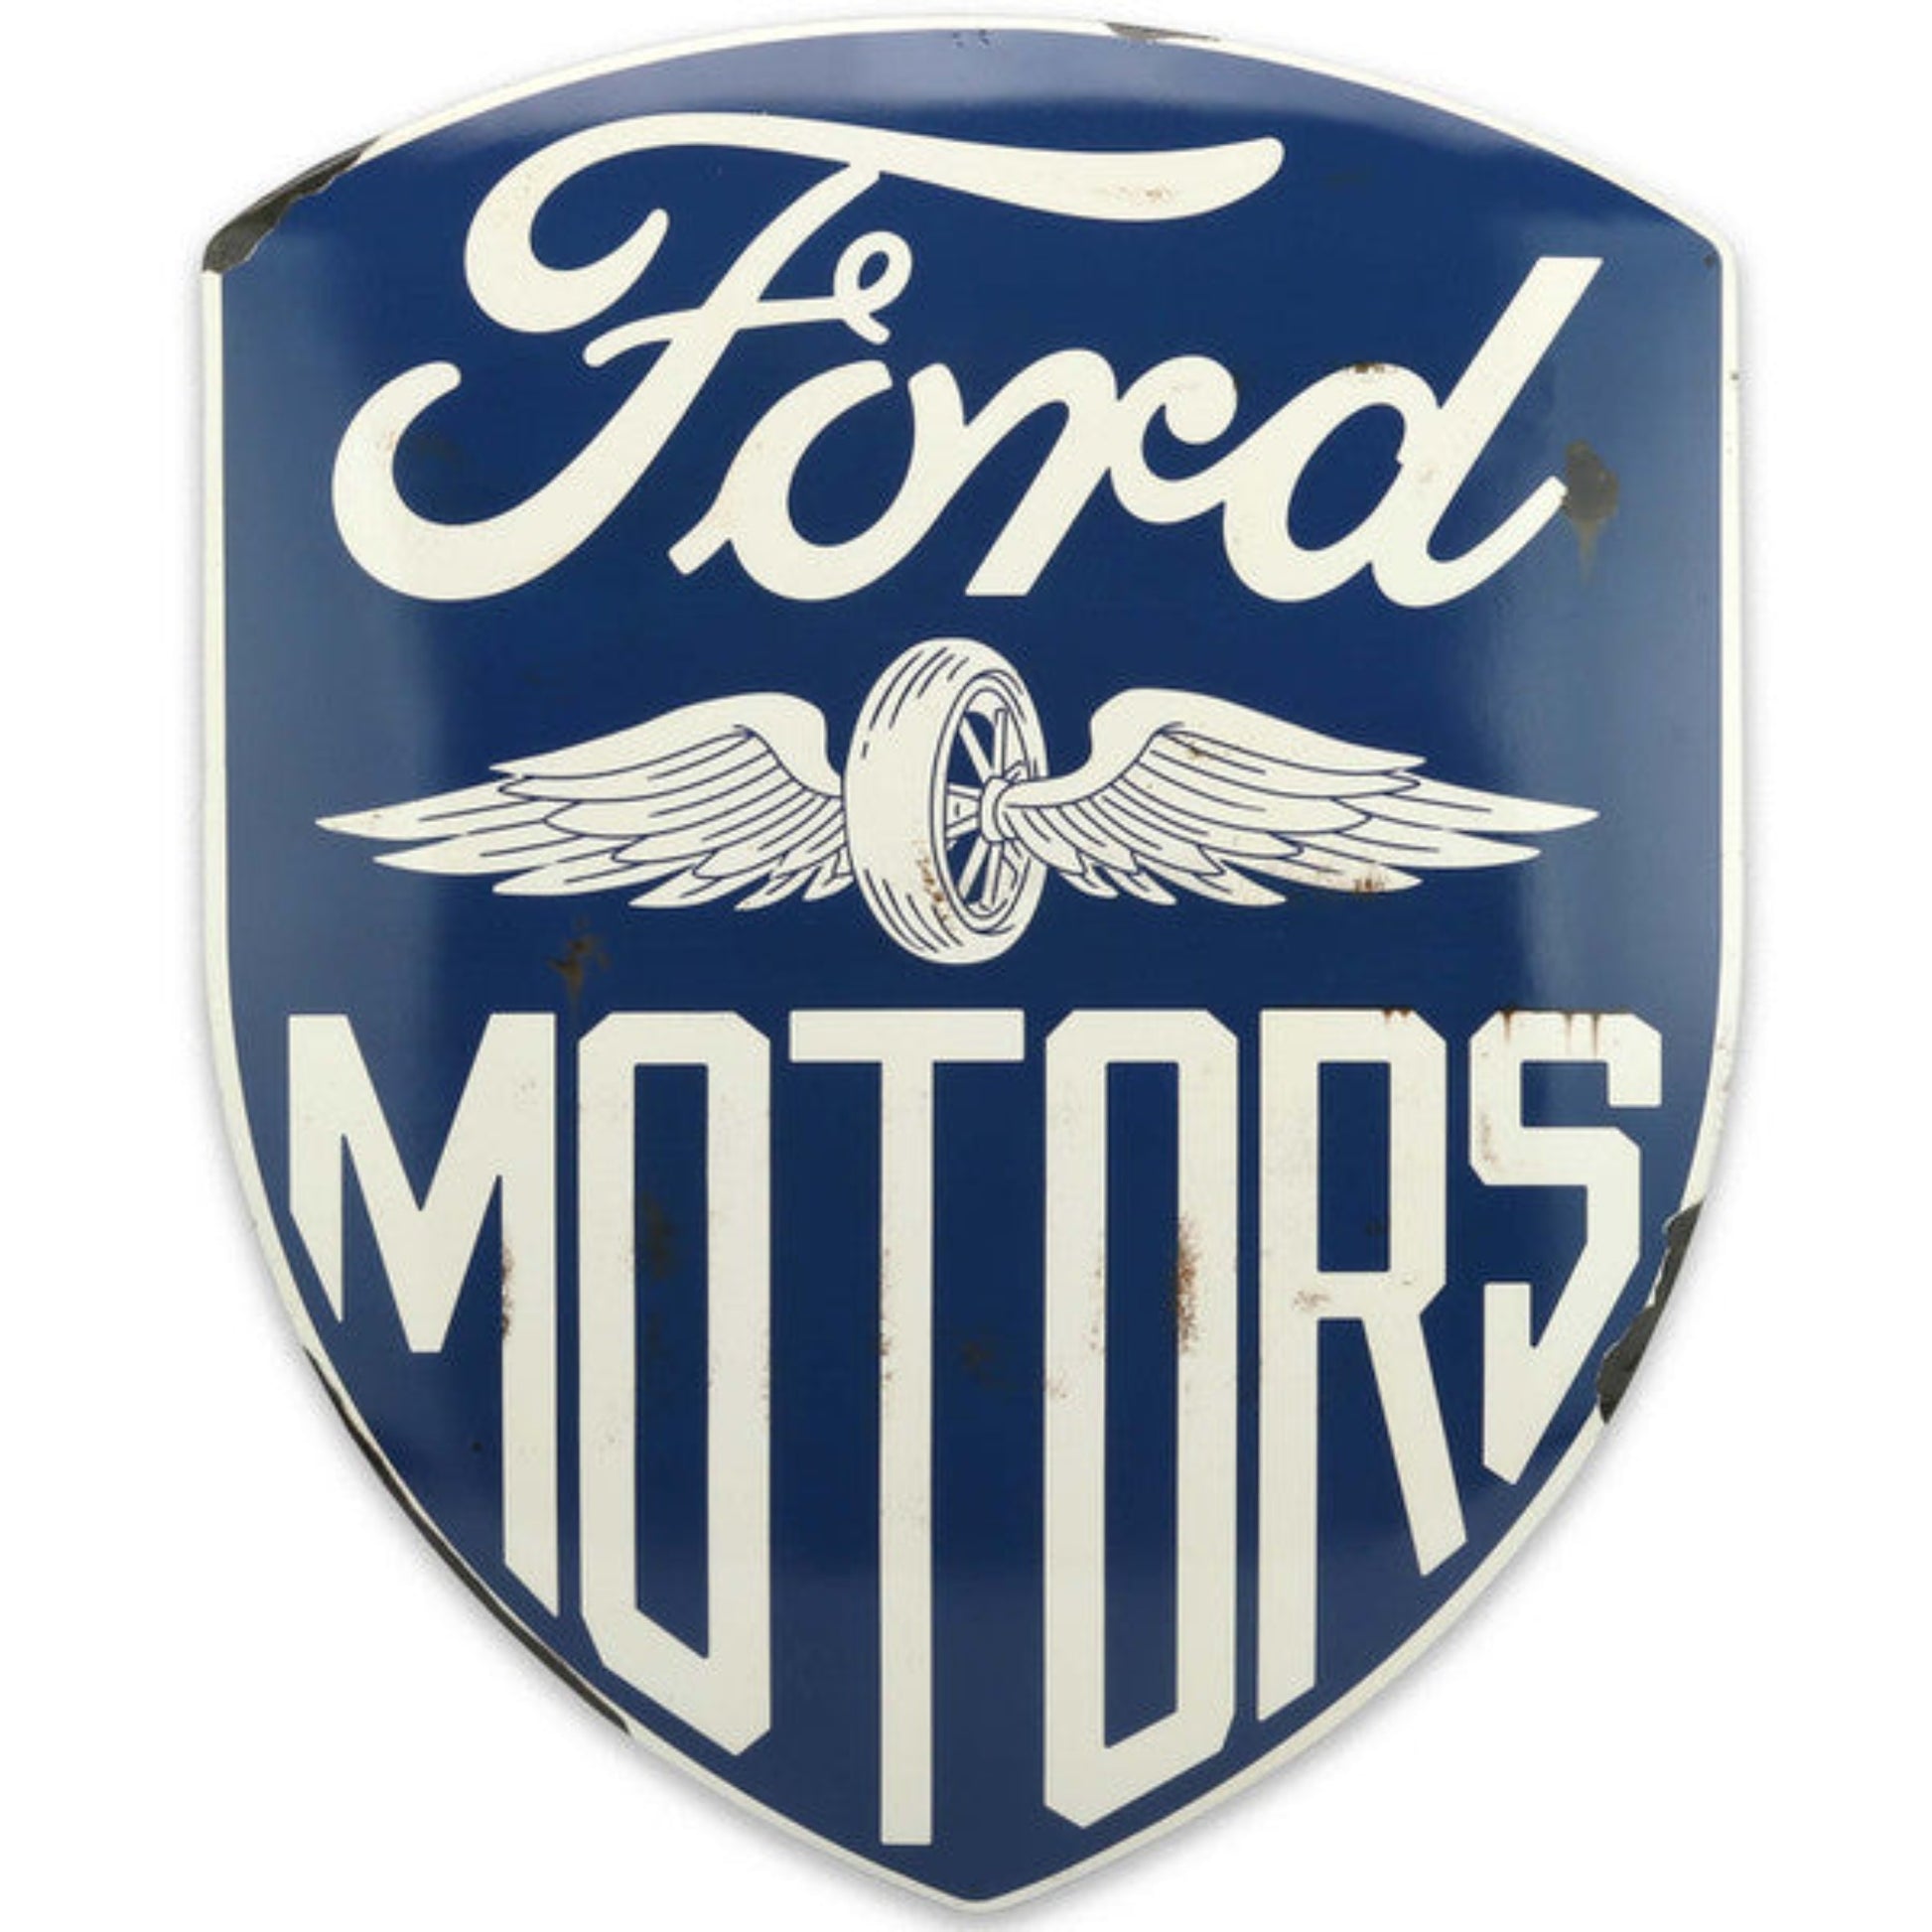 Blue Domed Metal Sign with Ford Motors logo and wings